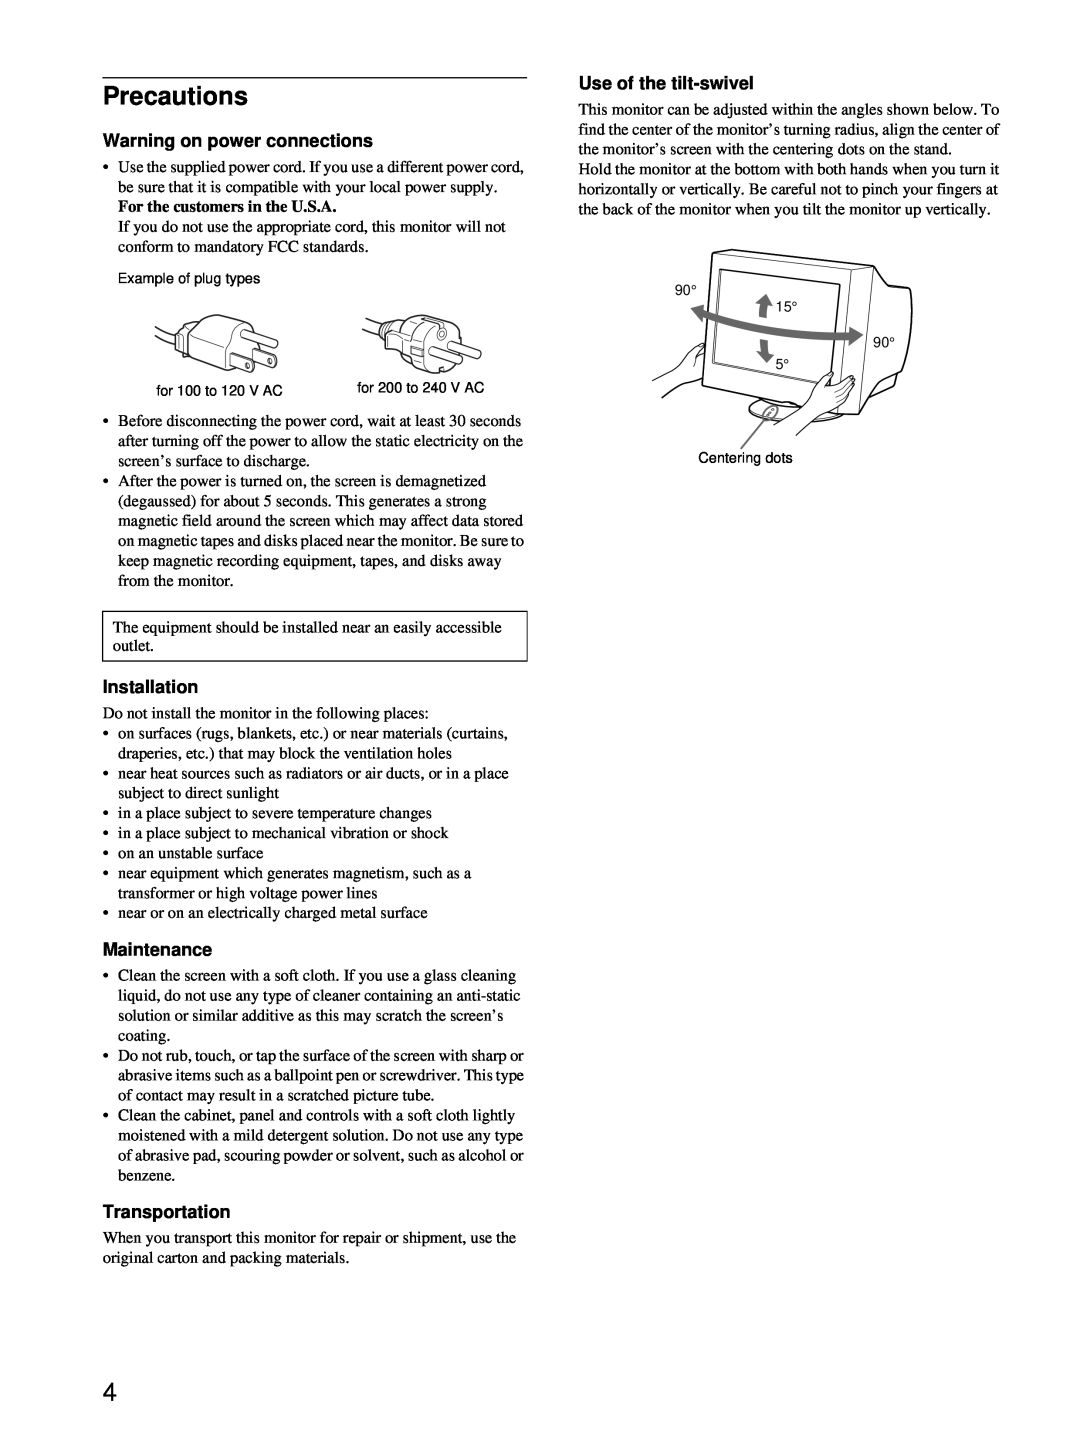 Sony CPD-E100 Precautions, Warning on power connections, Installation, Maintenance, Transportation, Use of the tilt-swivel 